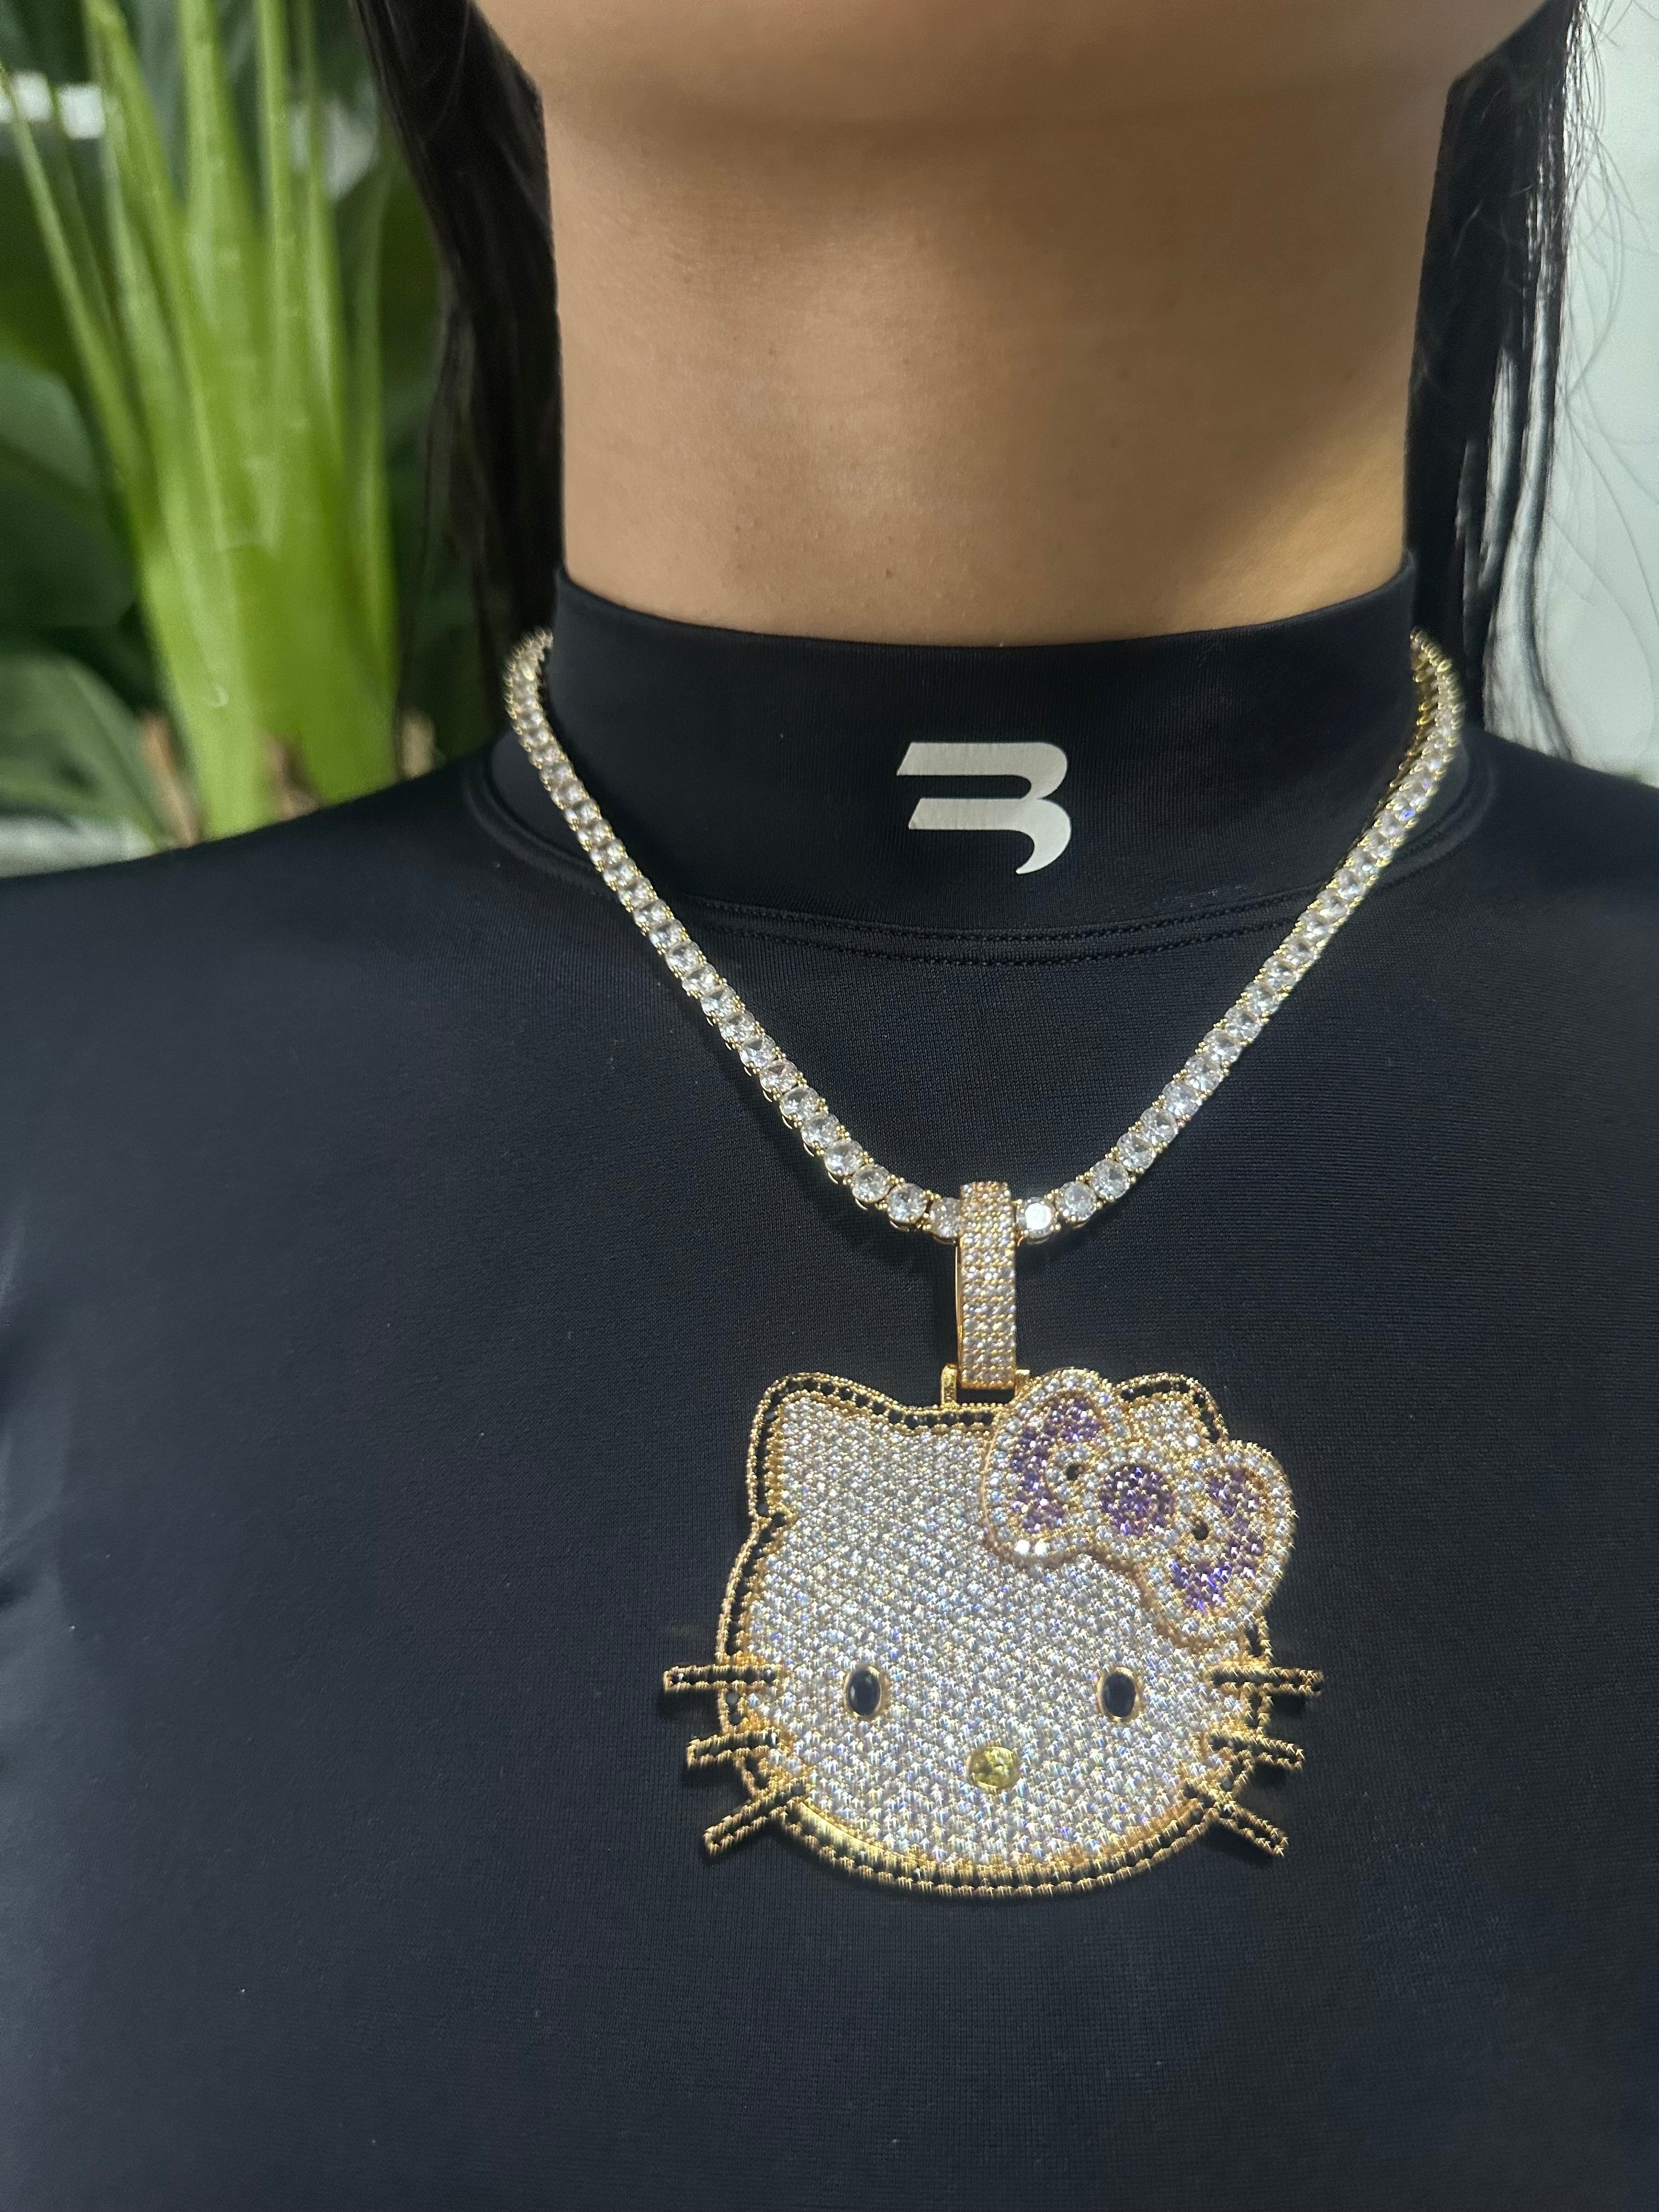 925sterling silver women hello kitty pendant + chain necklace premium grade  crystal moissanite diamonds from Australia lenght 46+5cm adjustable with  gift boxs and polishing cloth provided, Women's Fashion, Jewelry &  Organisers, Necklaces